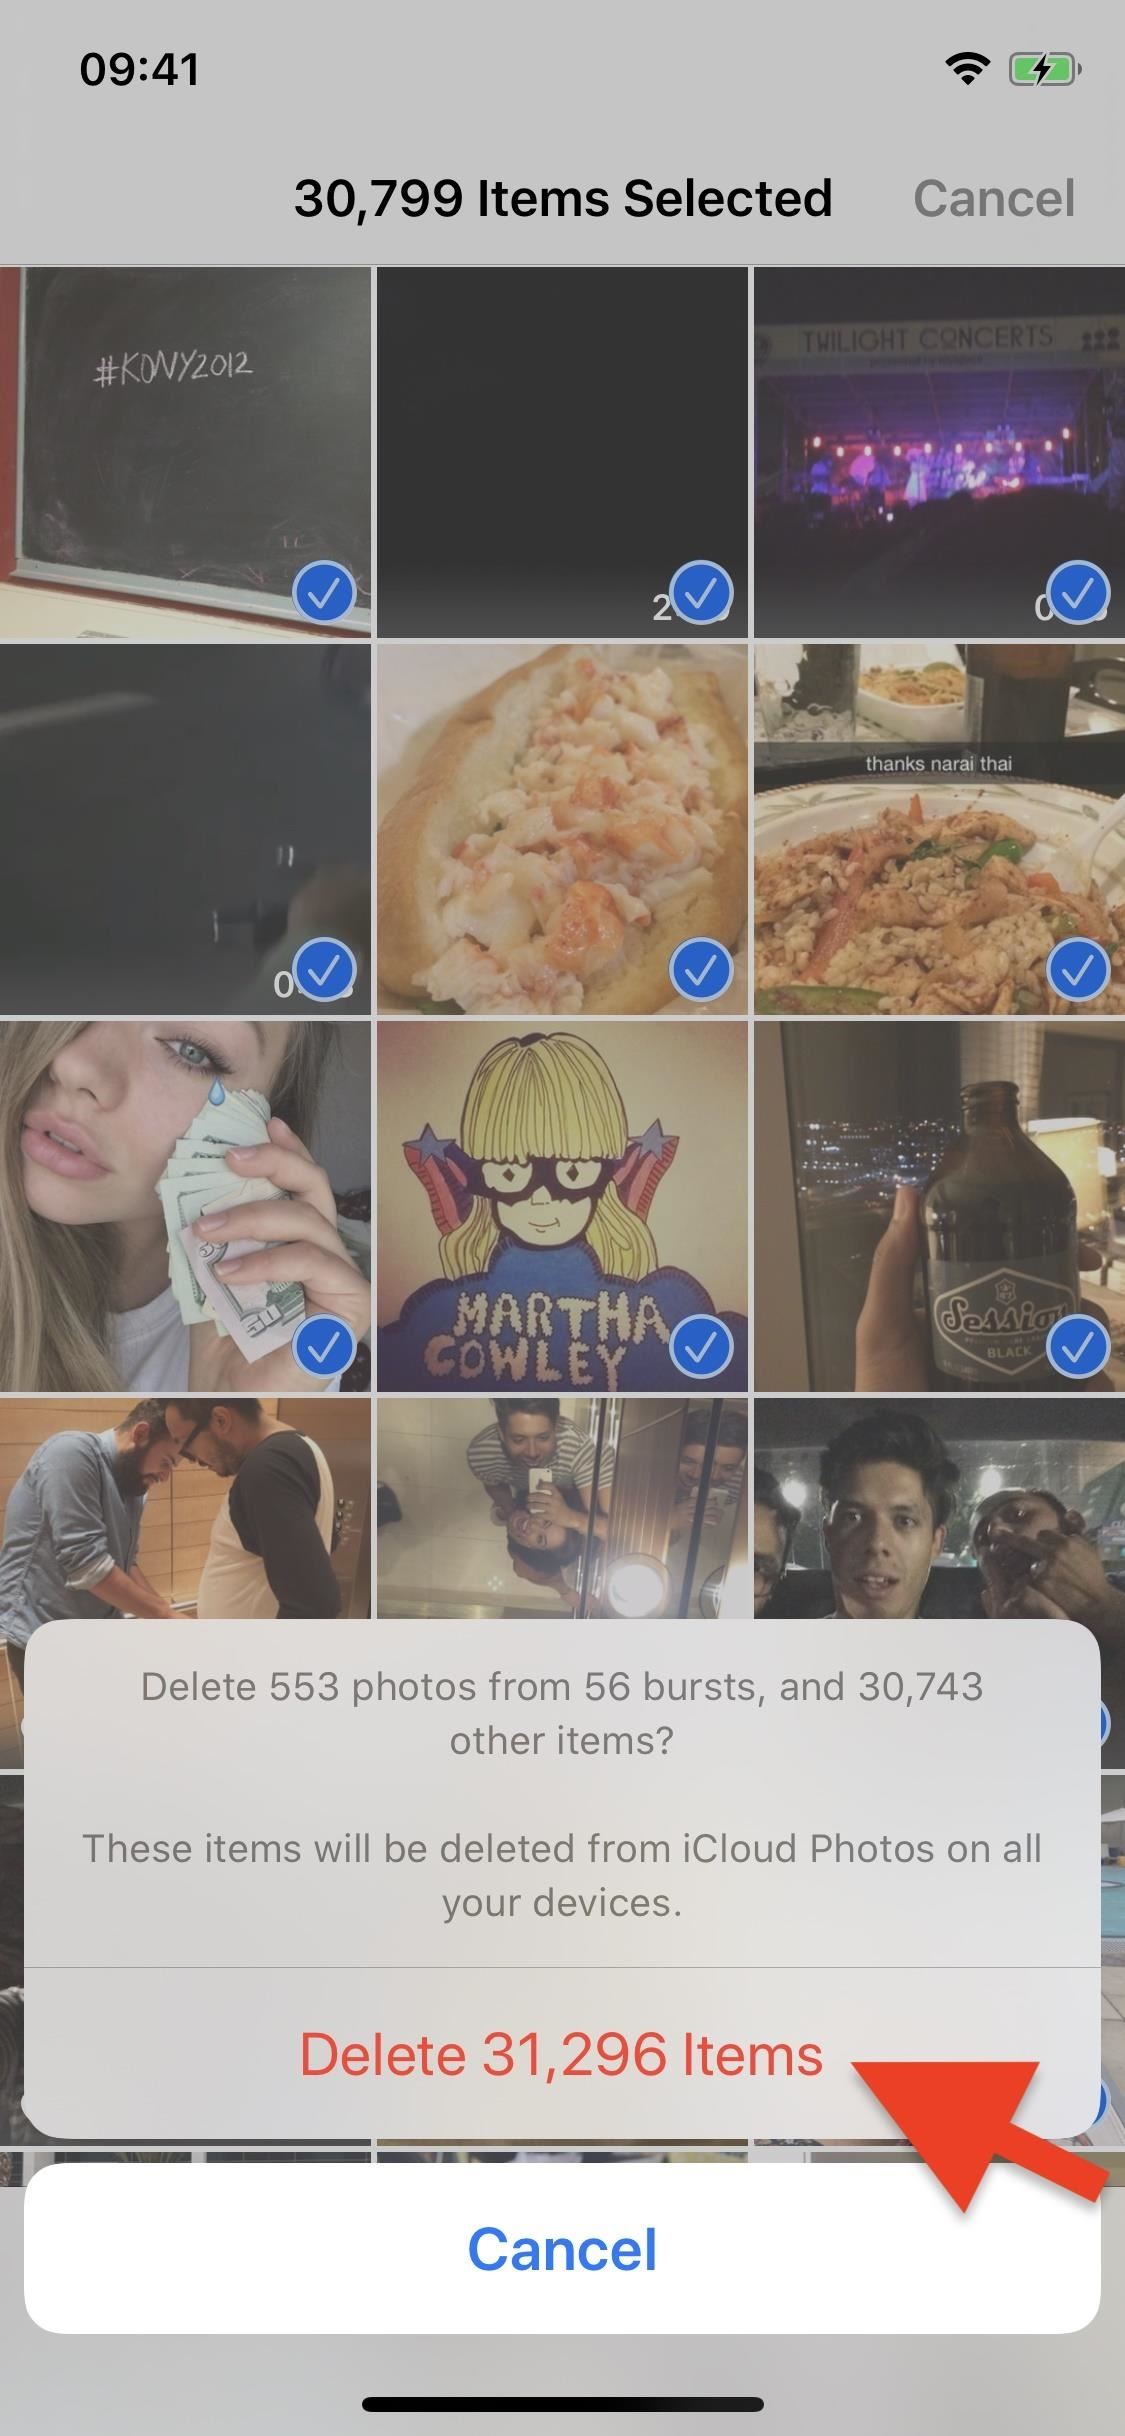 Use This Trick to Quickly Select All Photos & Videos on Your iPhone to Bulk Delete or Share